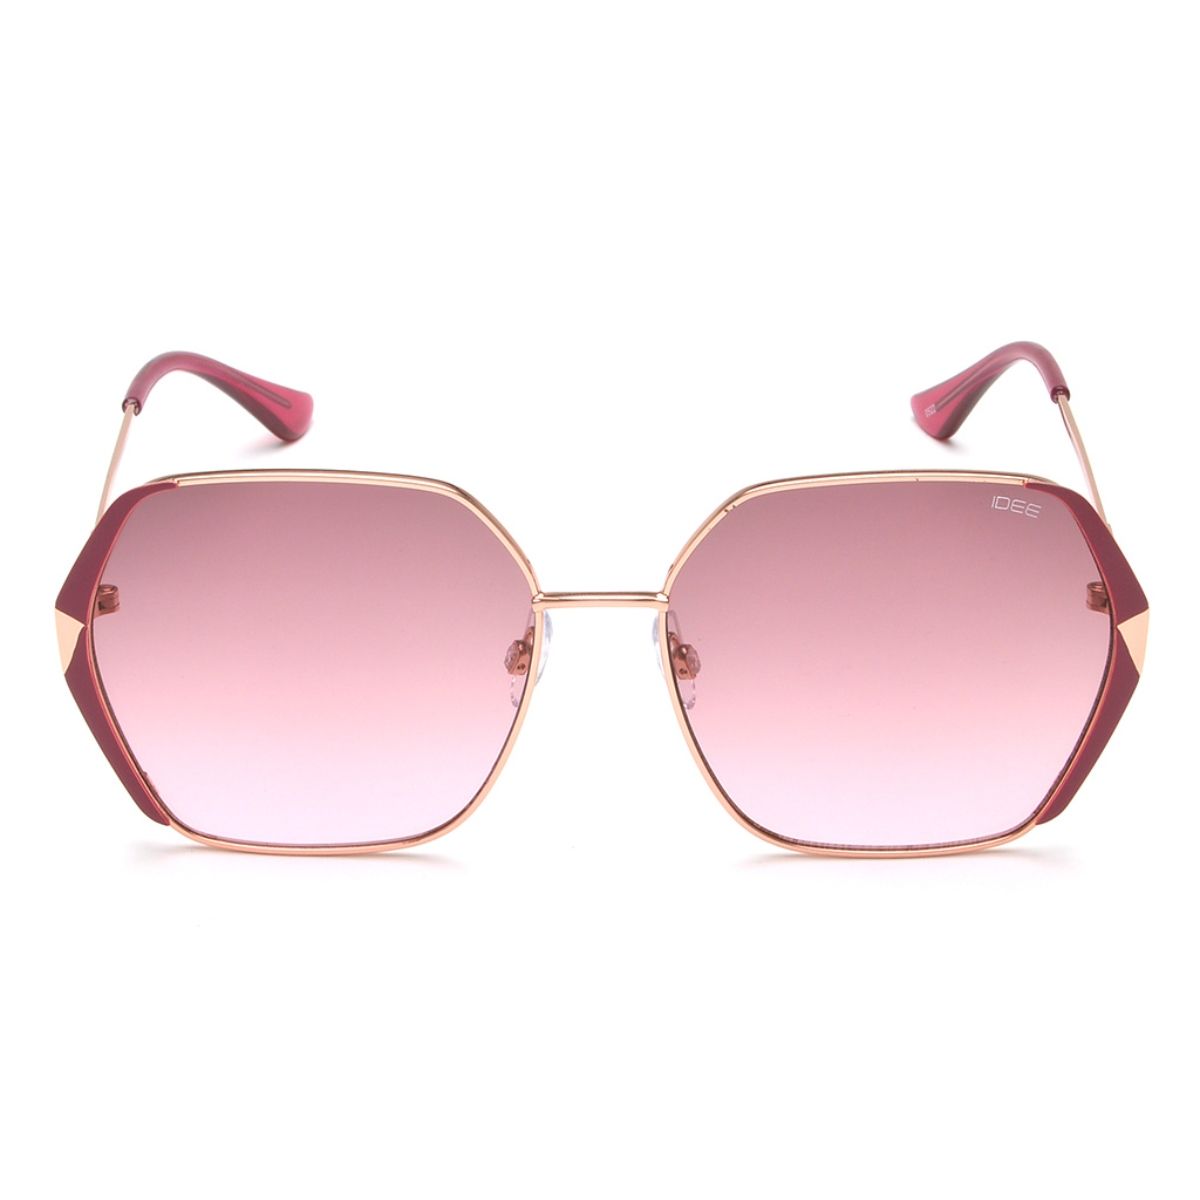 Aggregate more than 272 pink sunglasses women